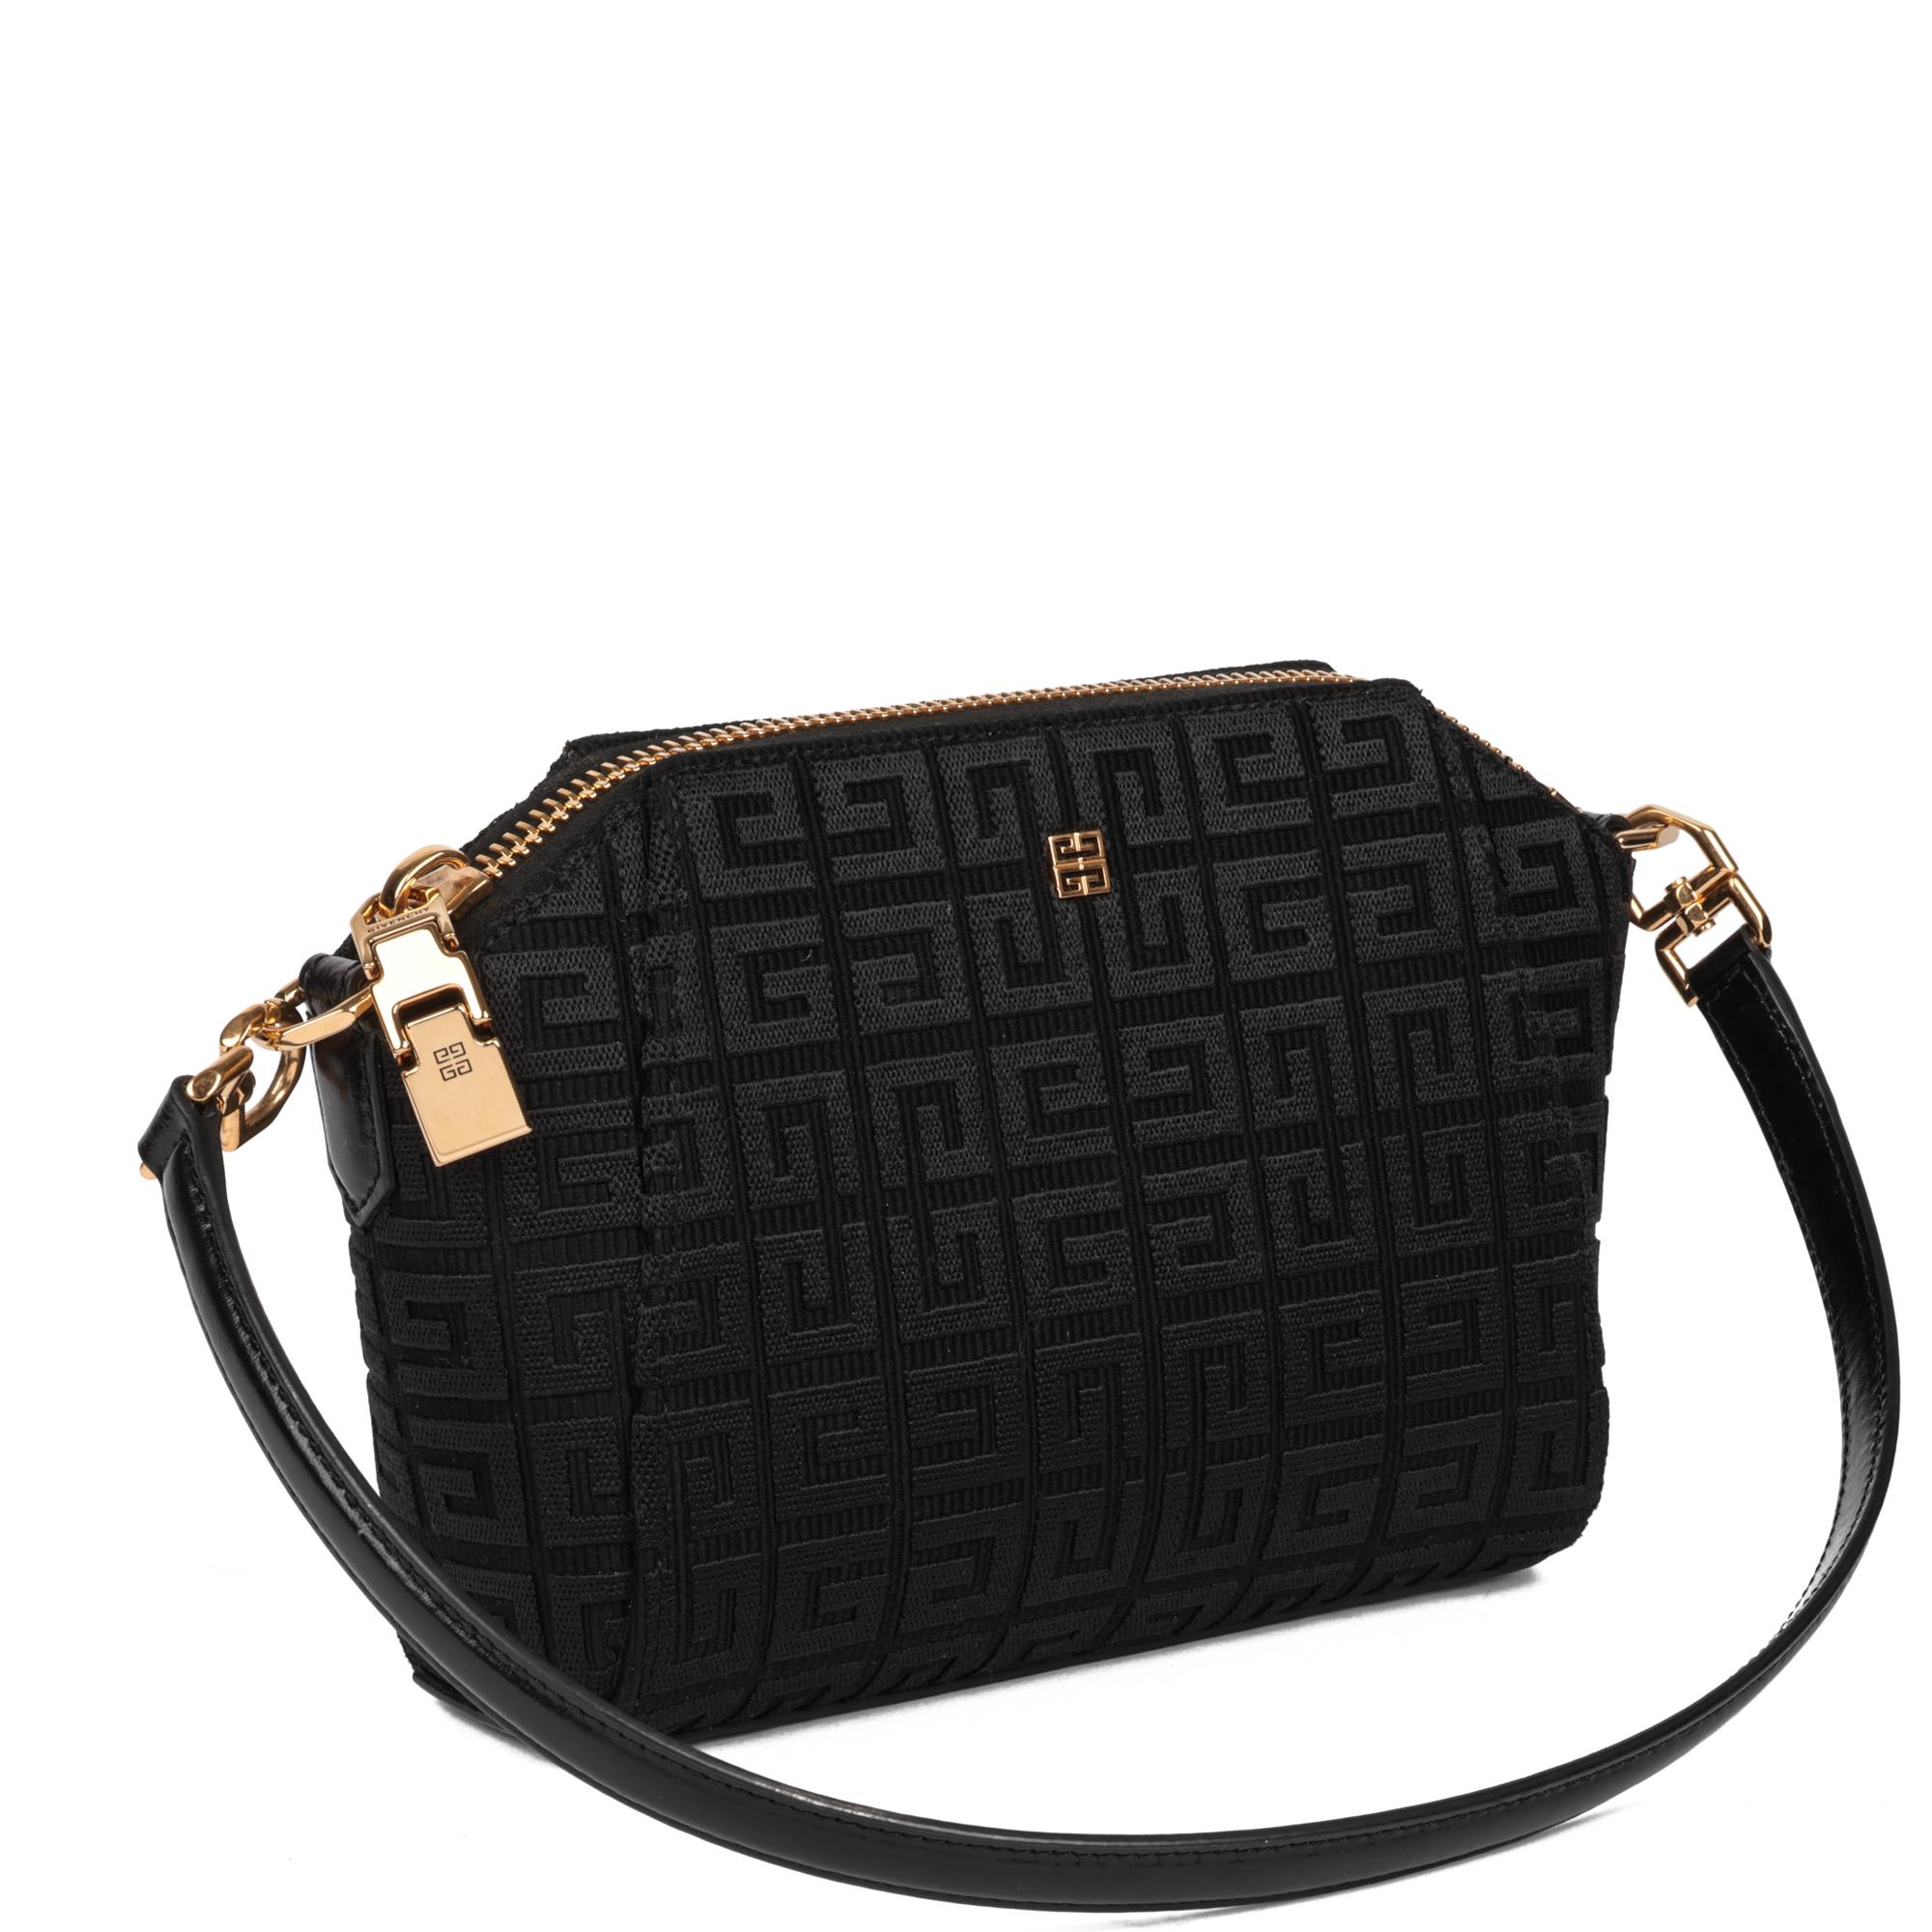 GIVENCHY
Black Canvas Antigona XS Bag

Xupes Reference: CB855
Serial Number: KU H 0291
Age (Circa): 2021
Accompanied By: Givenchy Dust Bag, Care Booklet, Tag, Fashionette Invoice
Authenticity Details: Date Stamp (Made in Italy)
Gender: Ladies
Type: